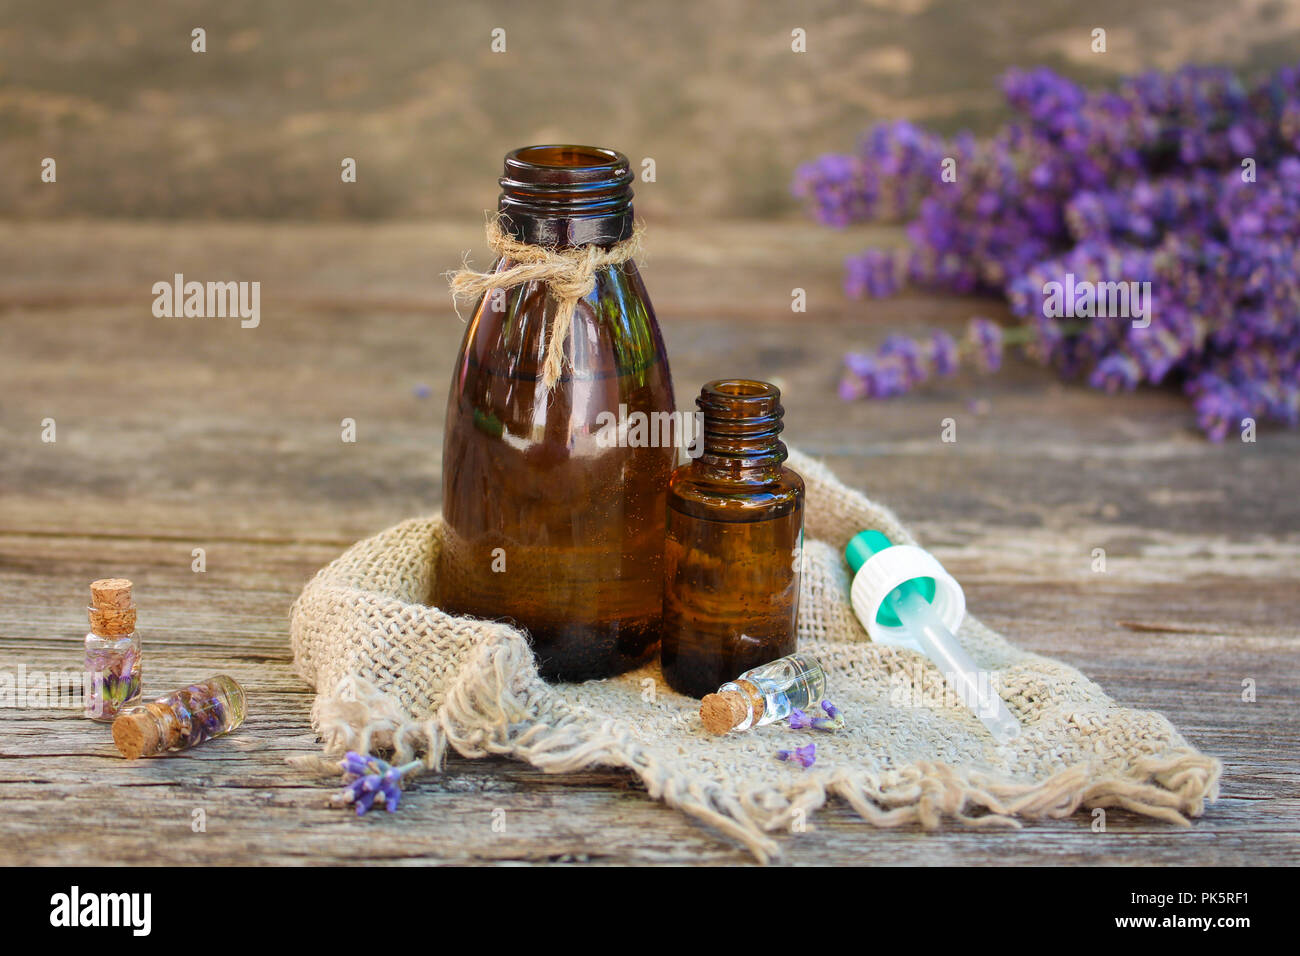 Lavender oil in different bottles on wooden background. Stock Photo